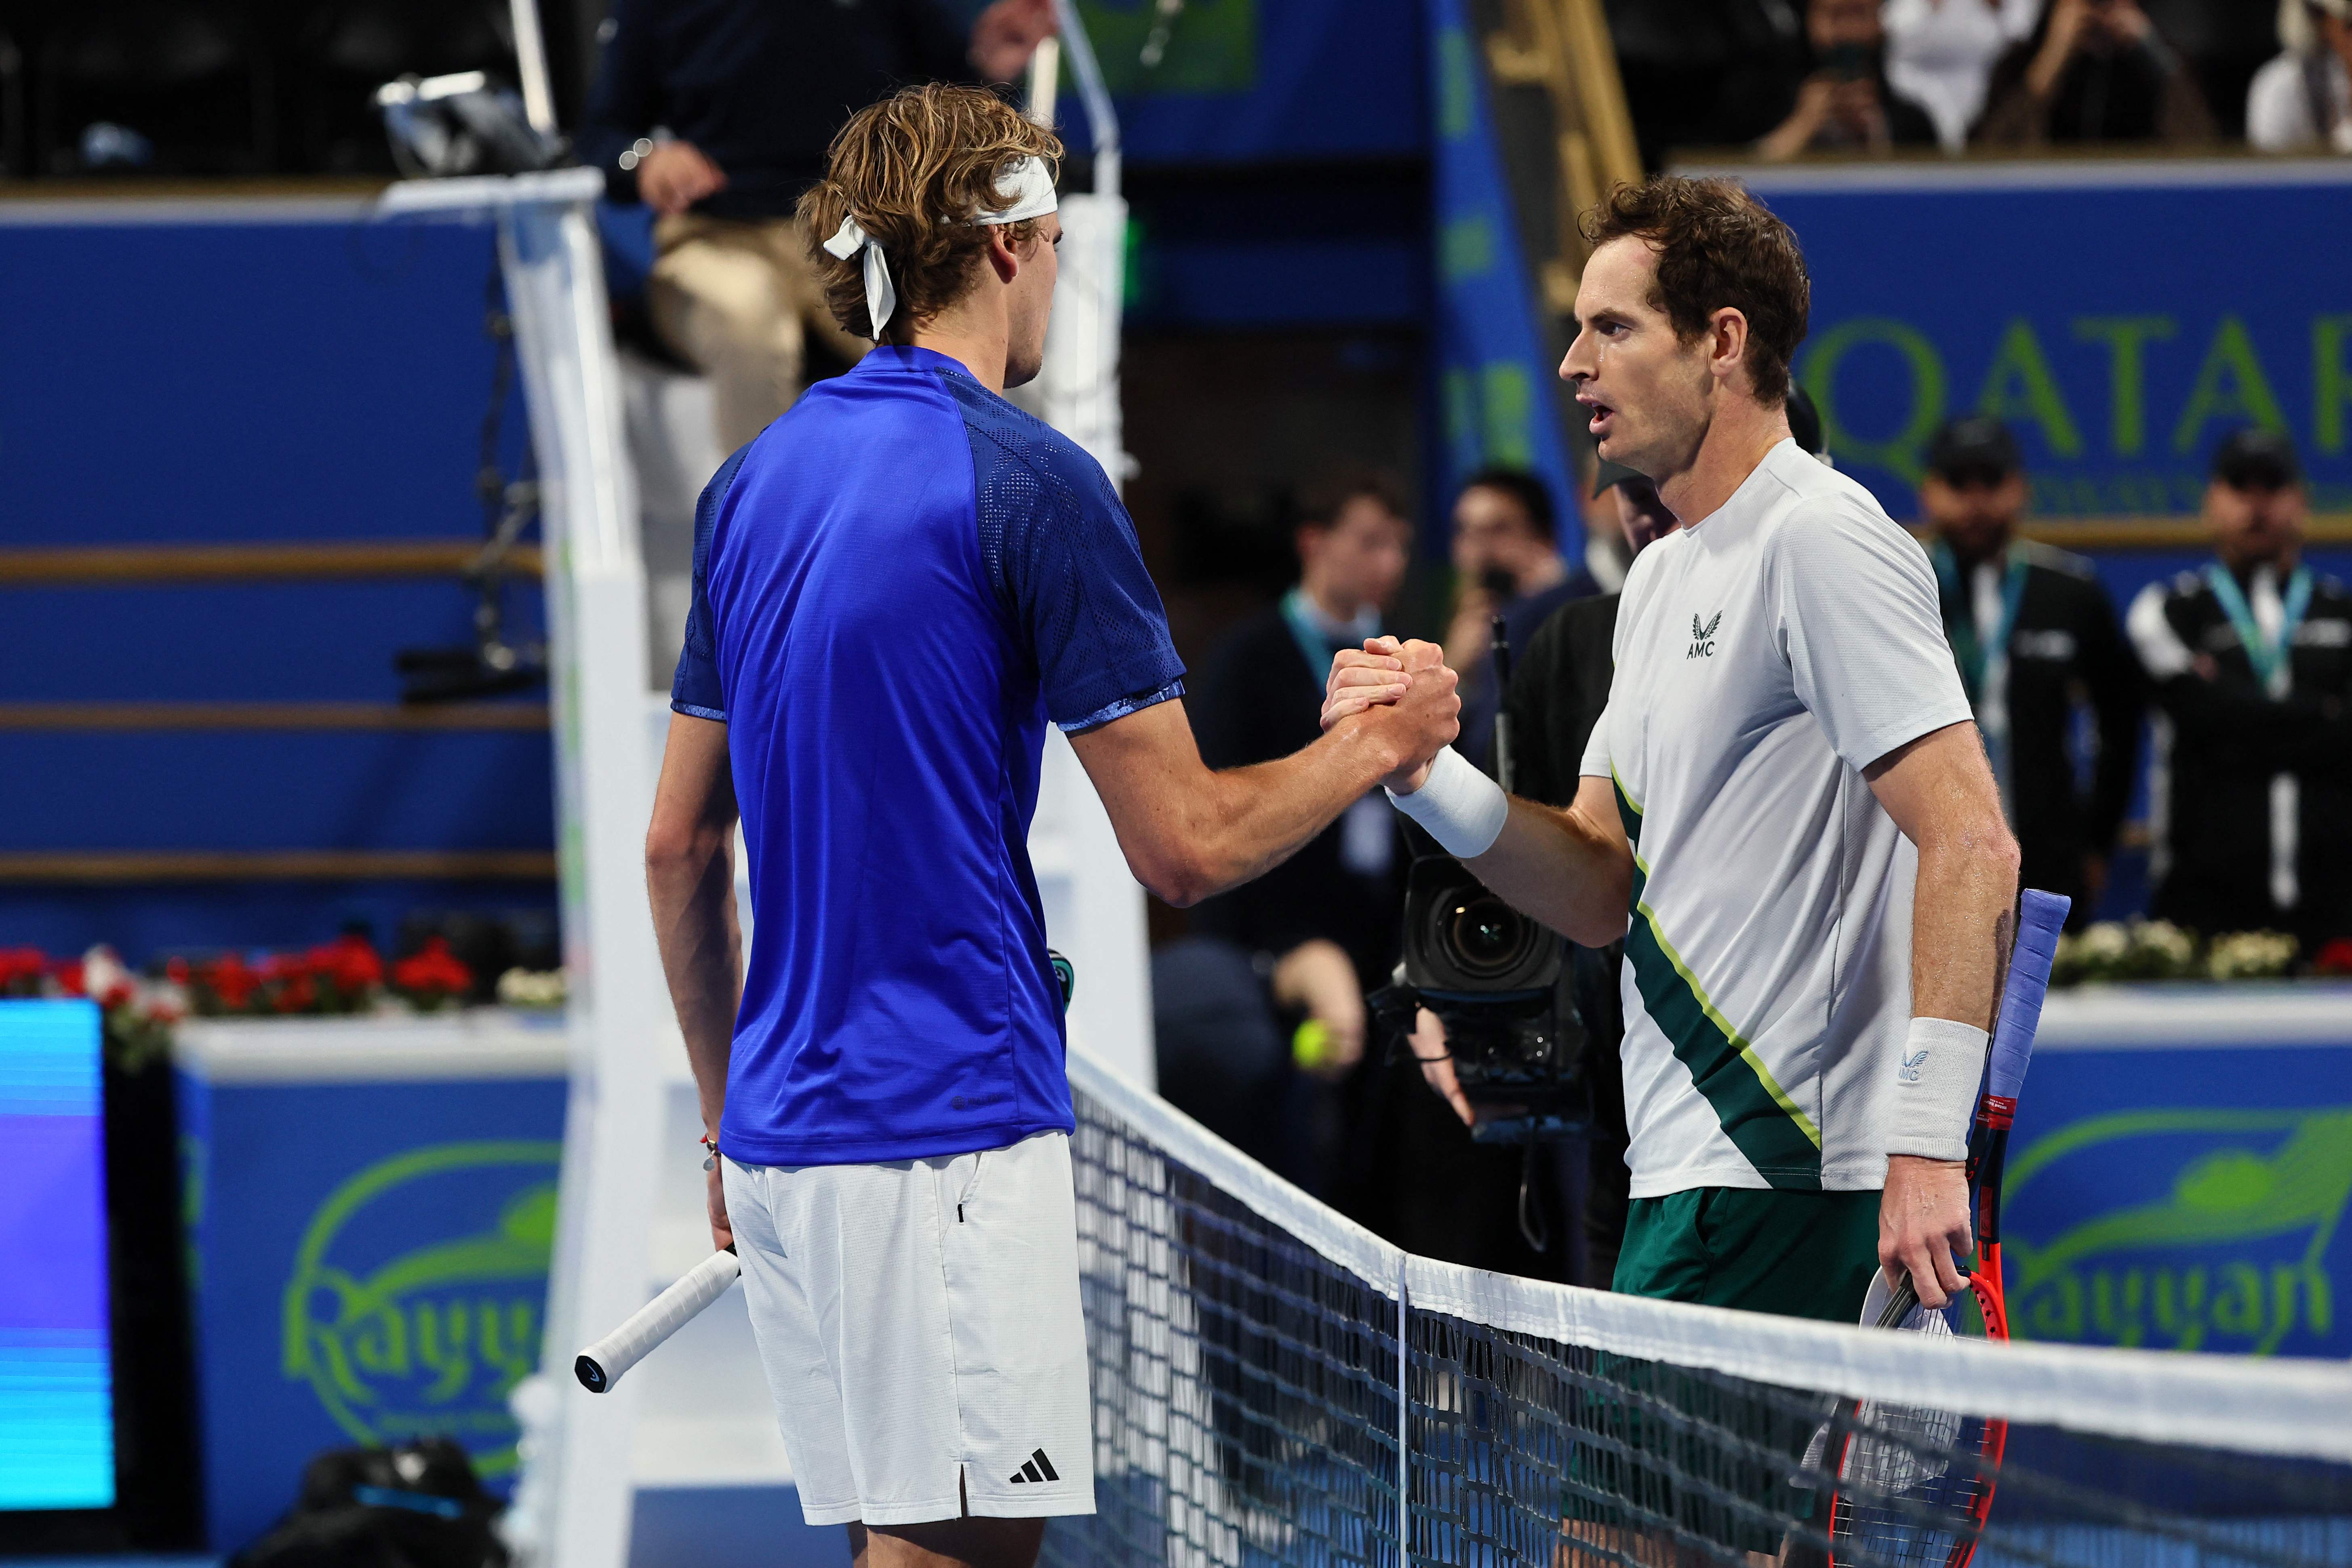 Andy Murray is congratulated by Alexander Zverev